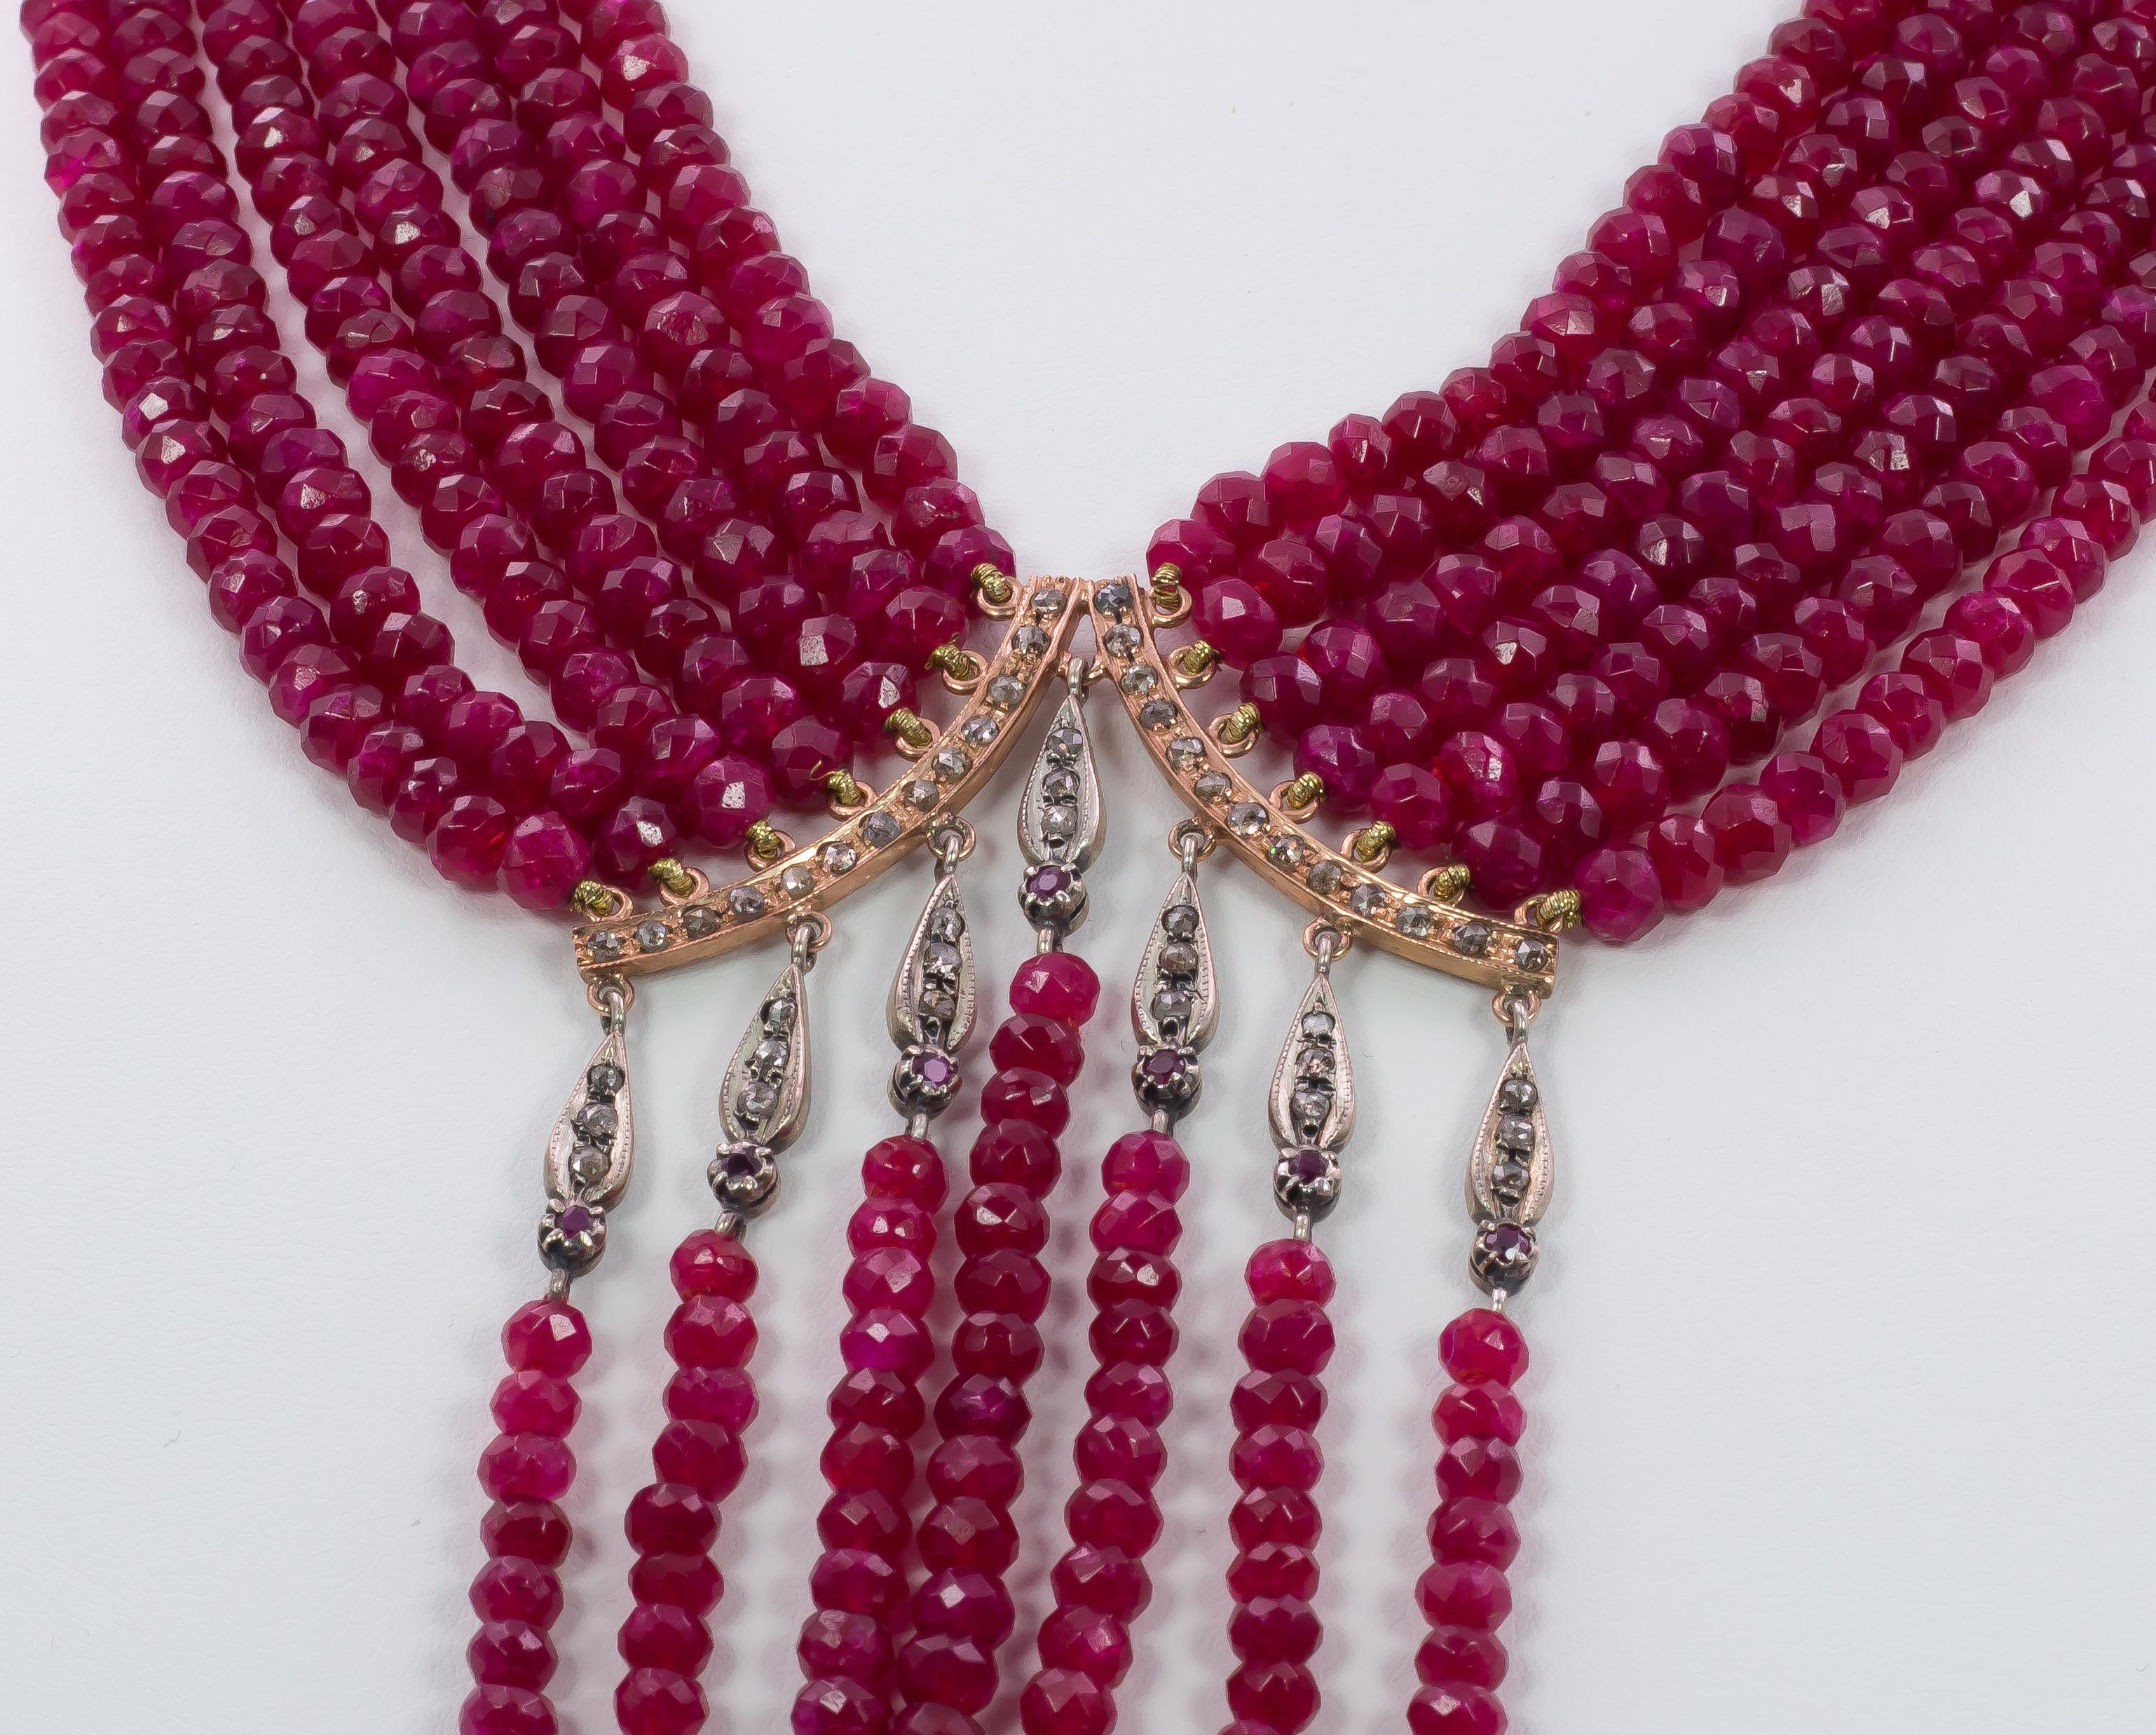 This stunning and elegant necklace is set with multi strands, each one set with rubies; seven pendant strands create a beautiful movement to this collier. The gold settings are ornamented with rose cut diamonds. 

MATERIALS
Gold, ruby and rose cut